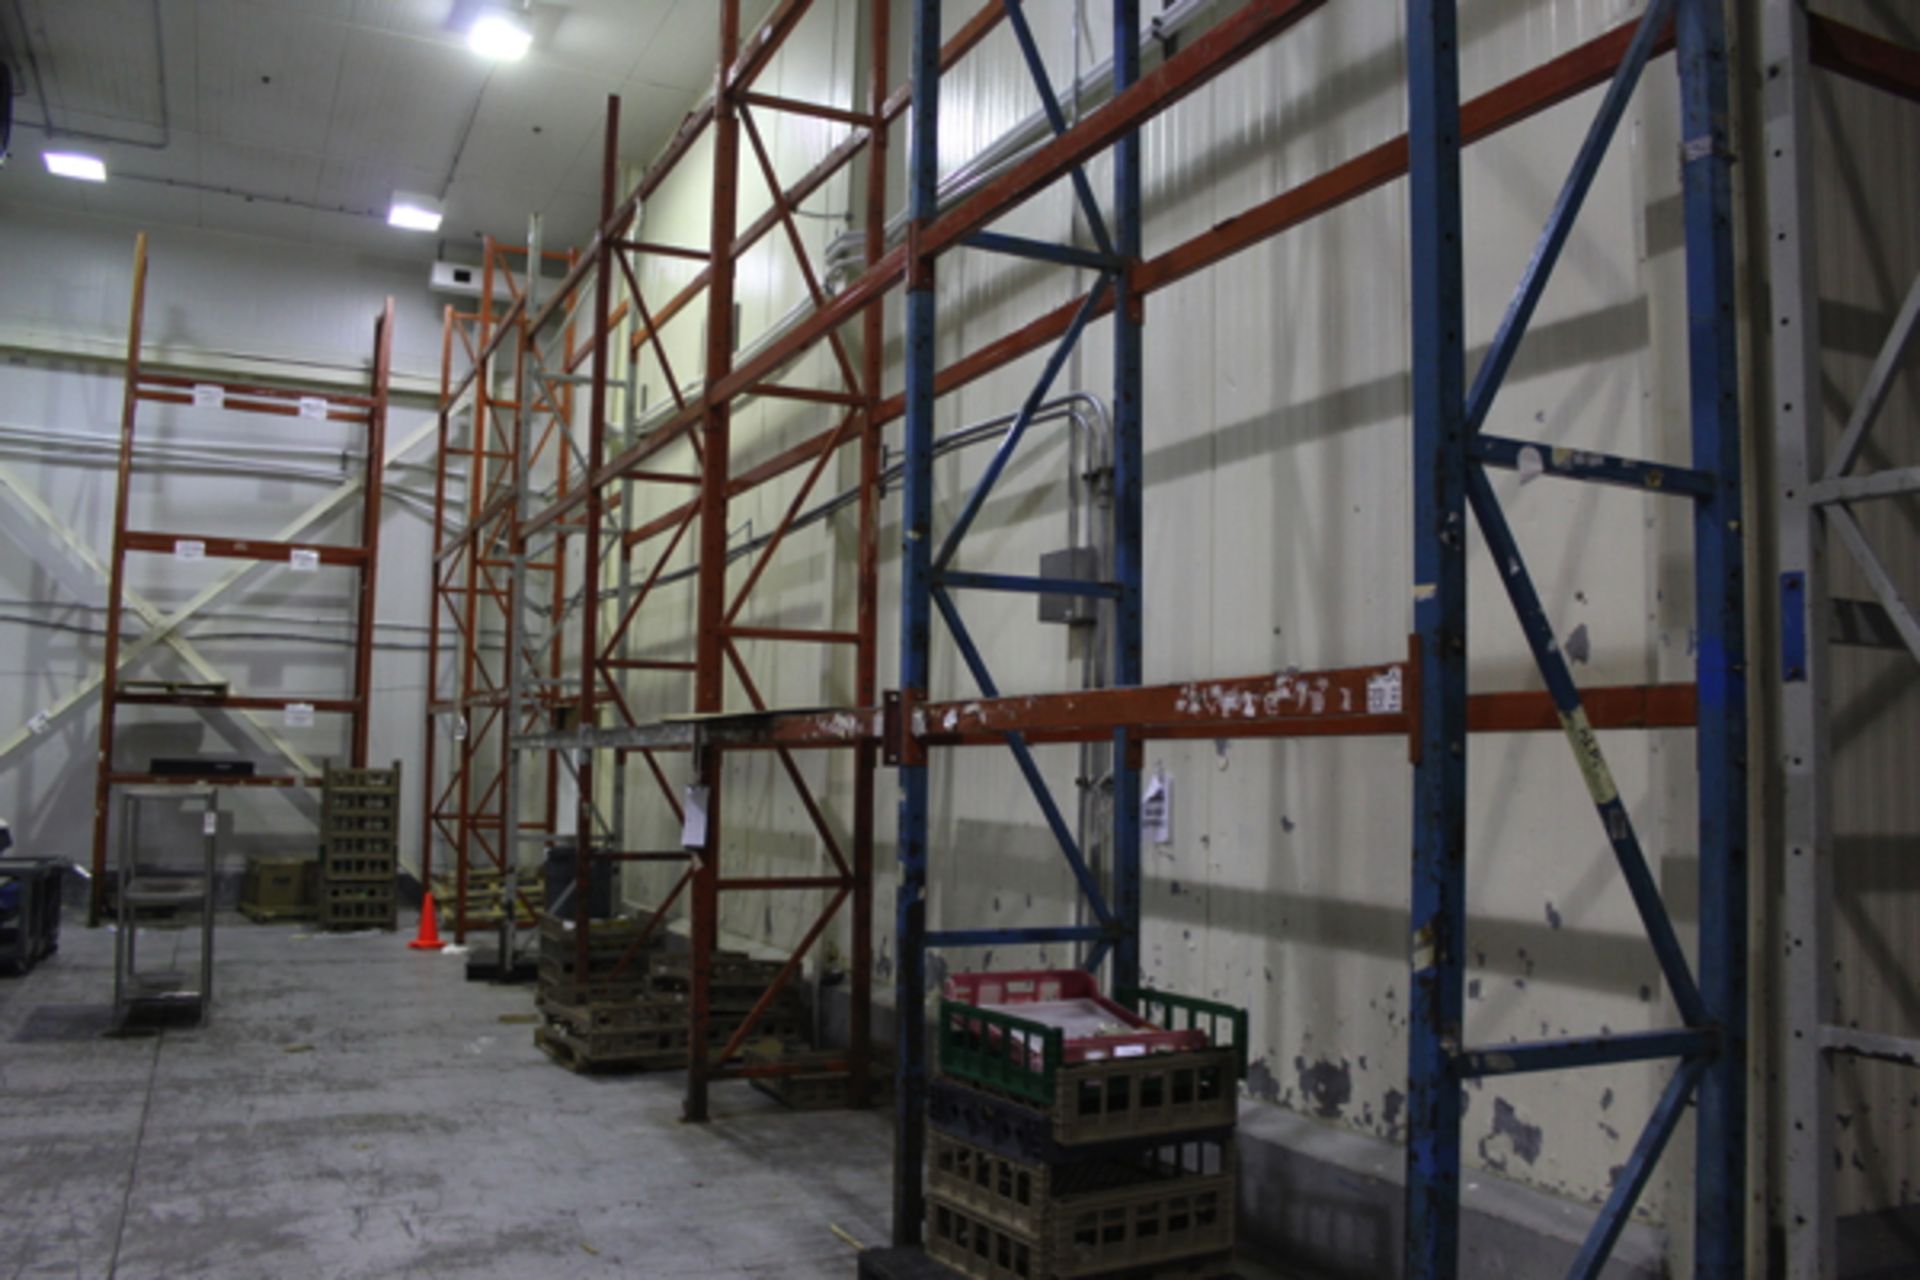 Lot of Pallet Racking, (29) 36" X 18' Uprights, (130) 8' Beams | Rigging Price: $950 - Image 2 of 5